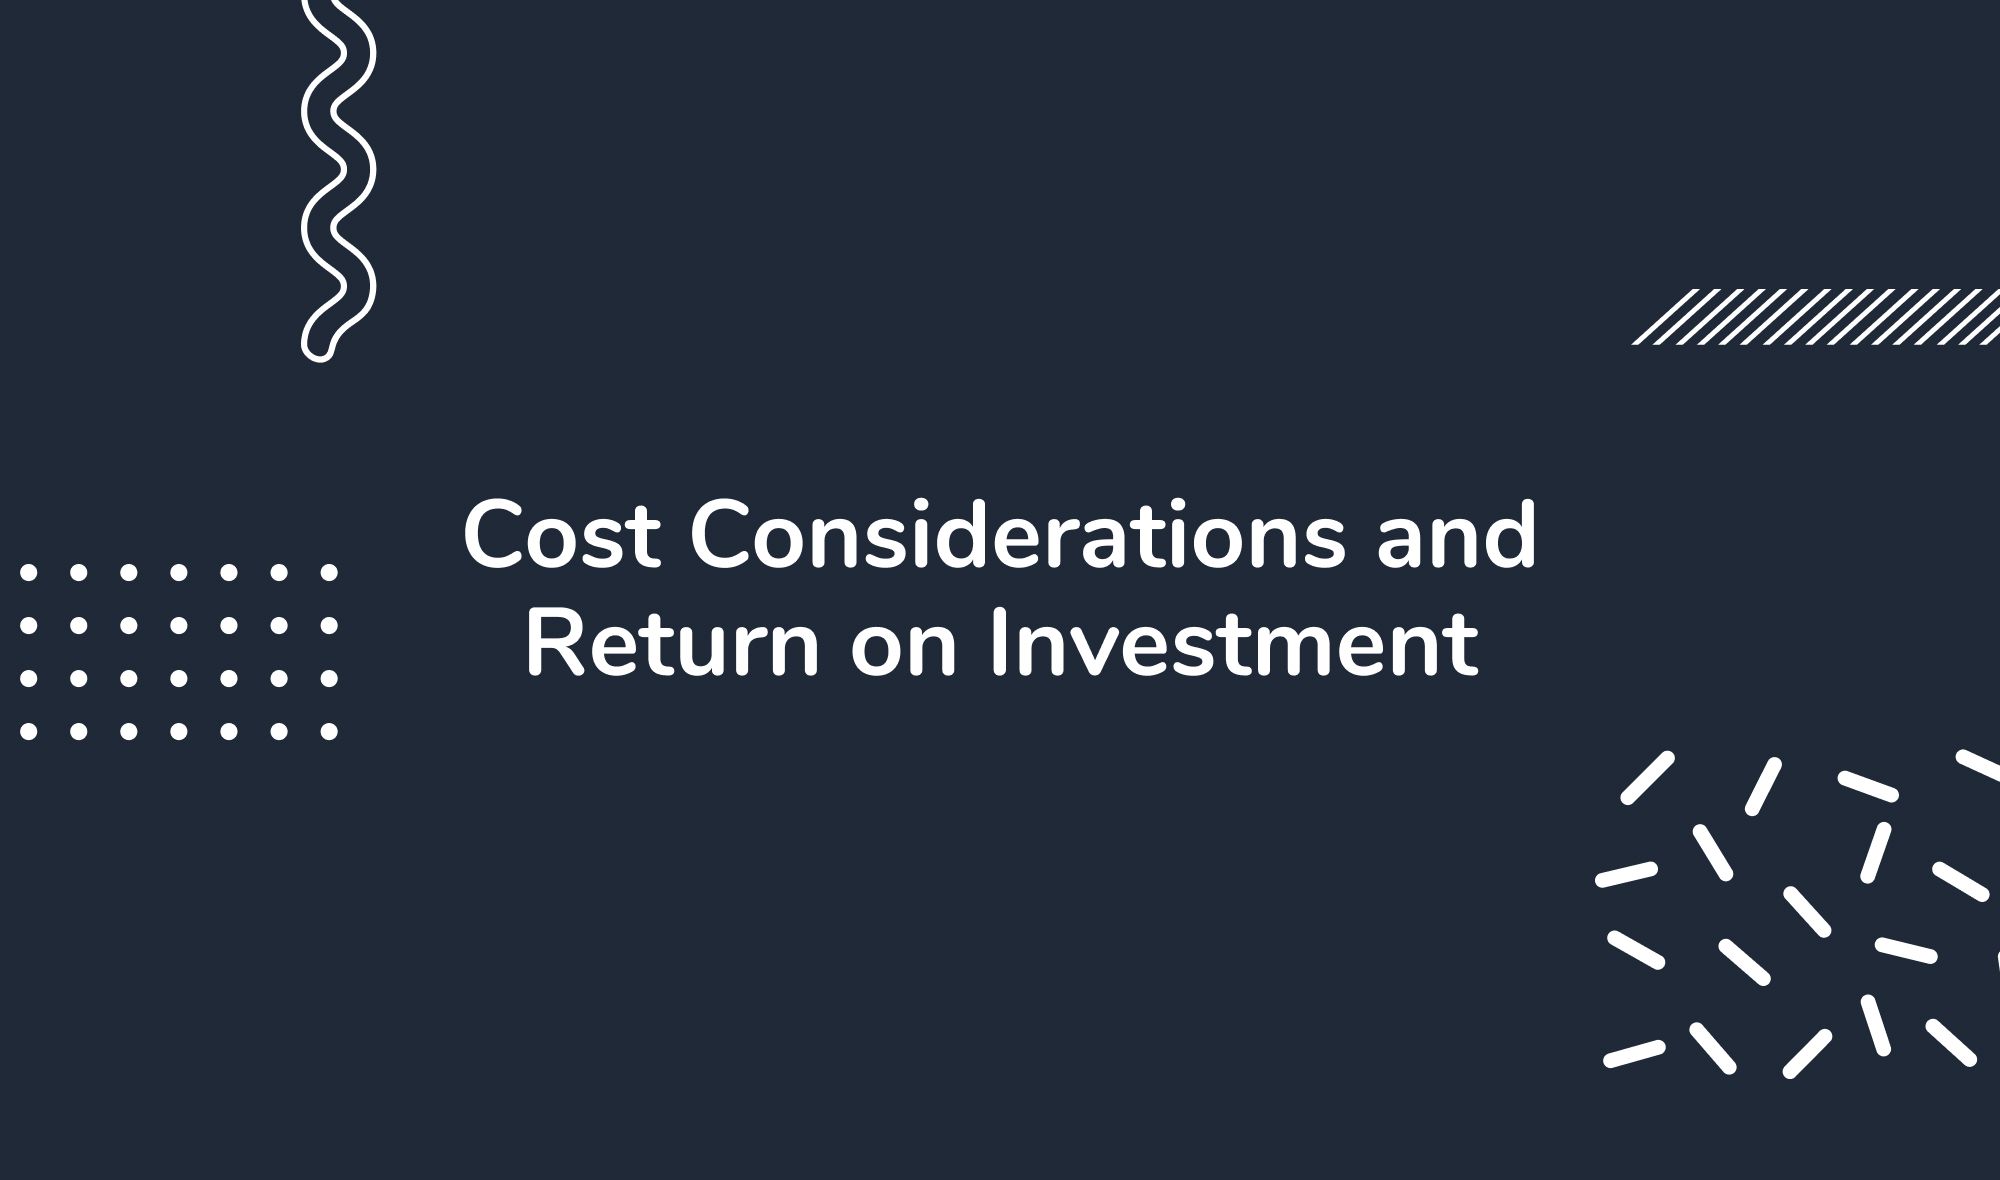 Cost Considerations and Return on Investment